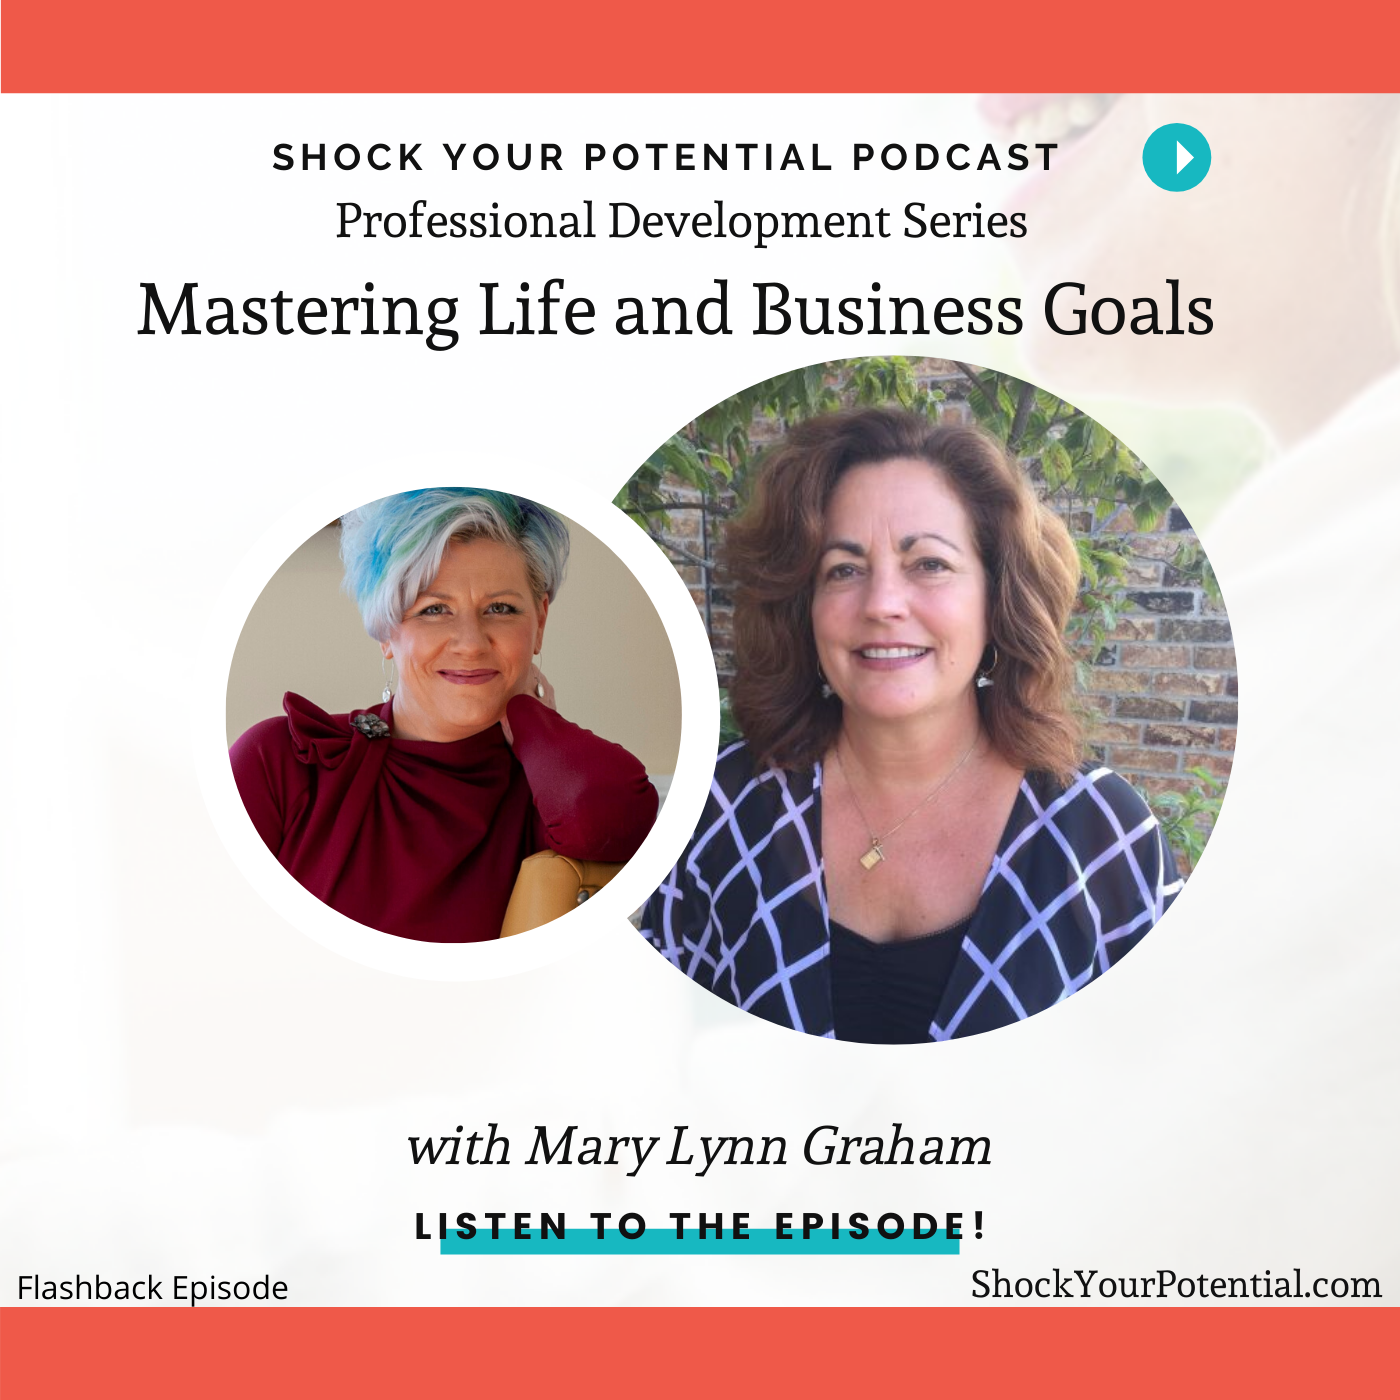 Mastering Life and Business Goals – Mary Lynn Graham